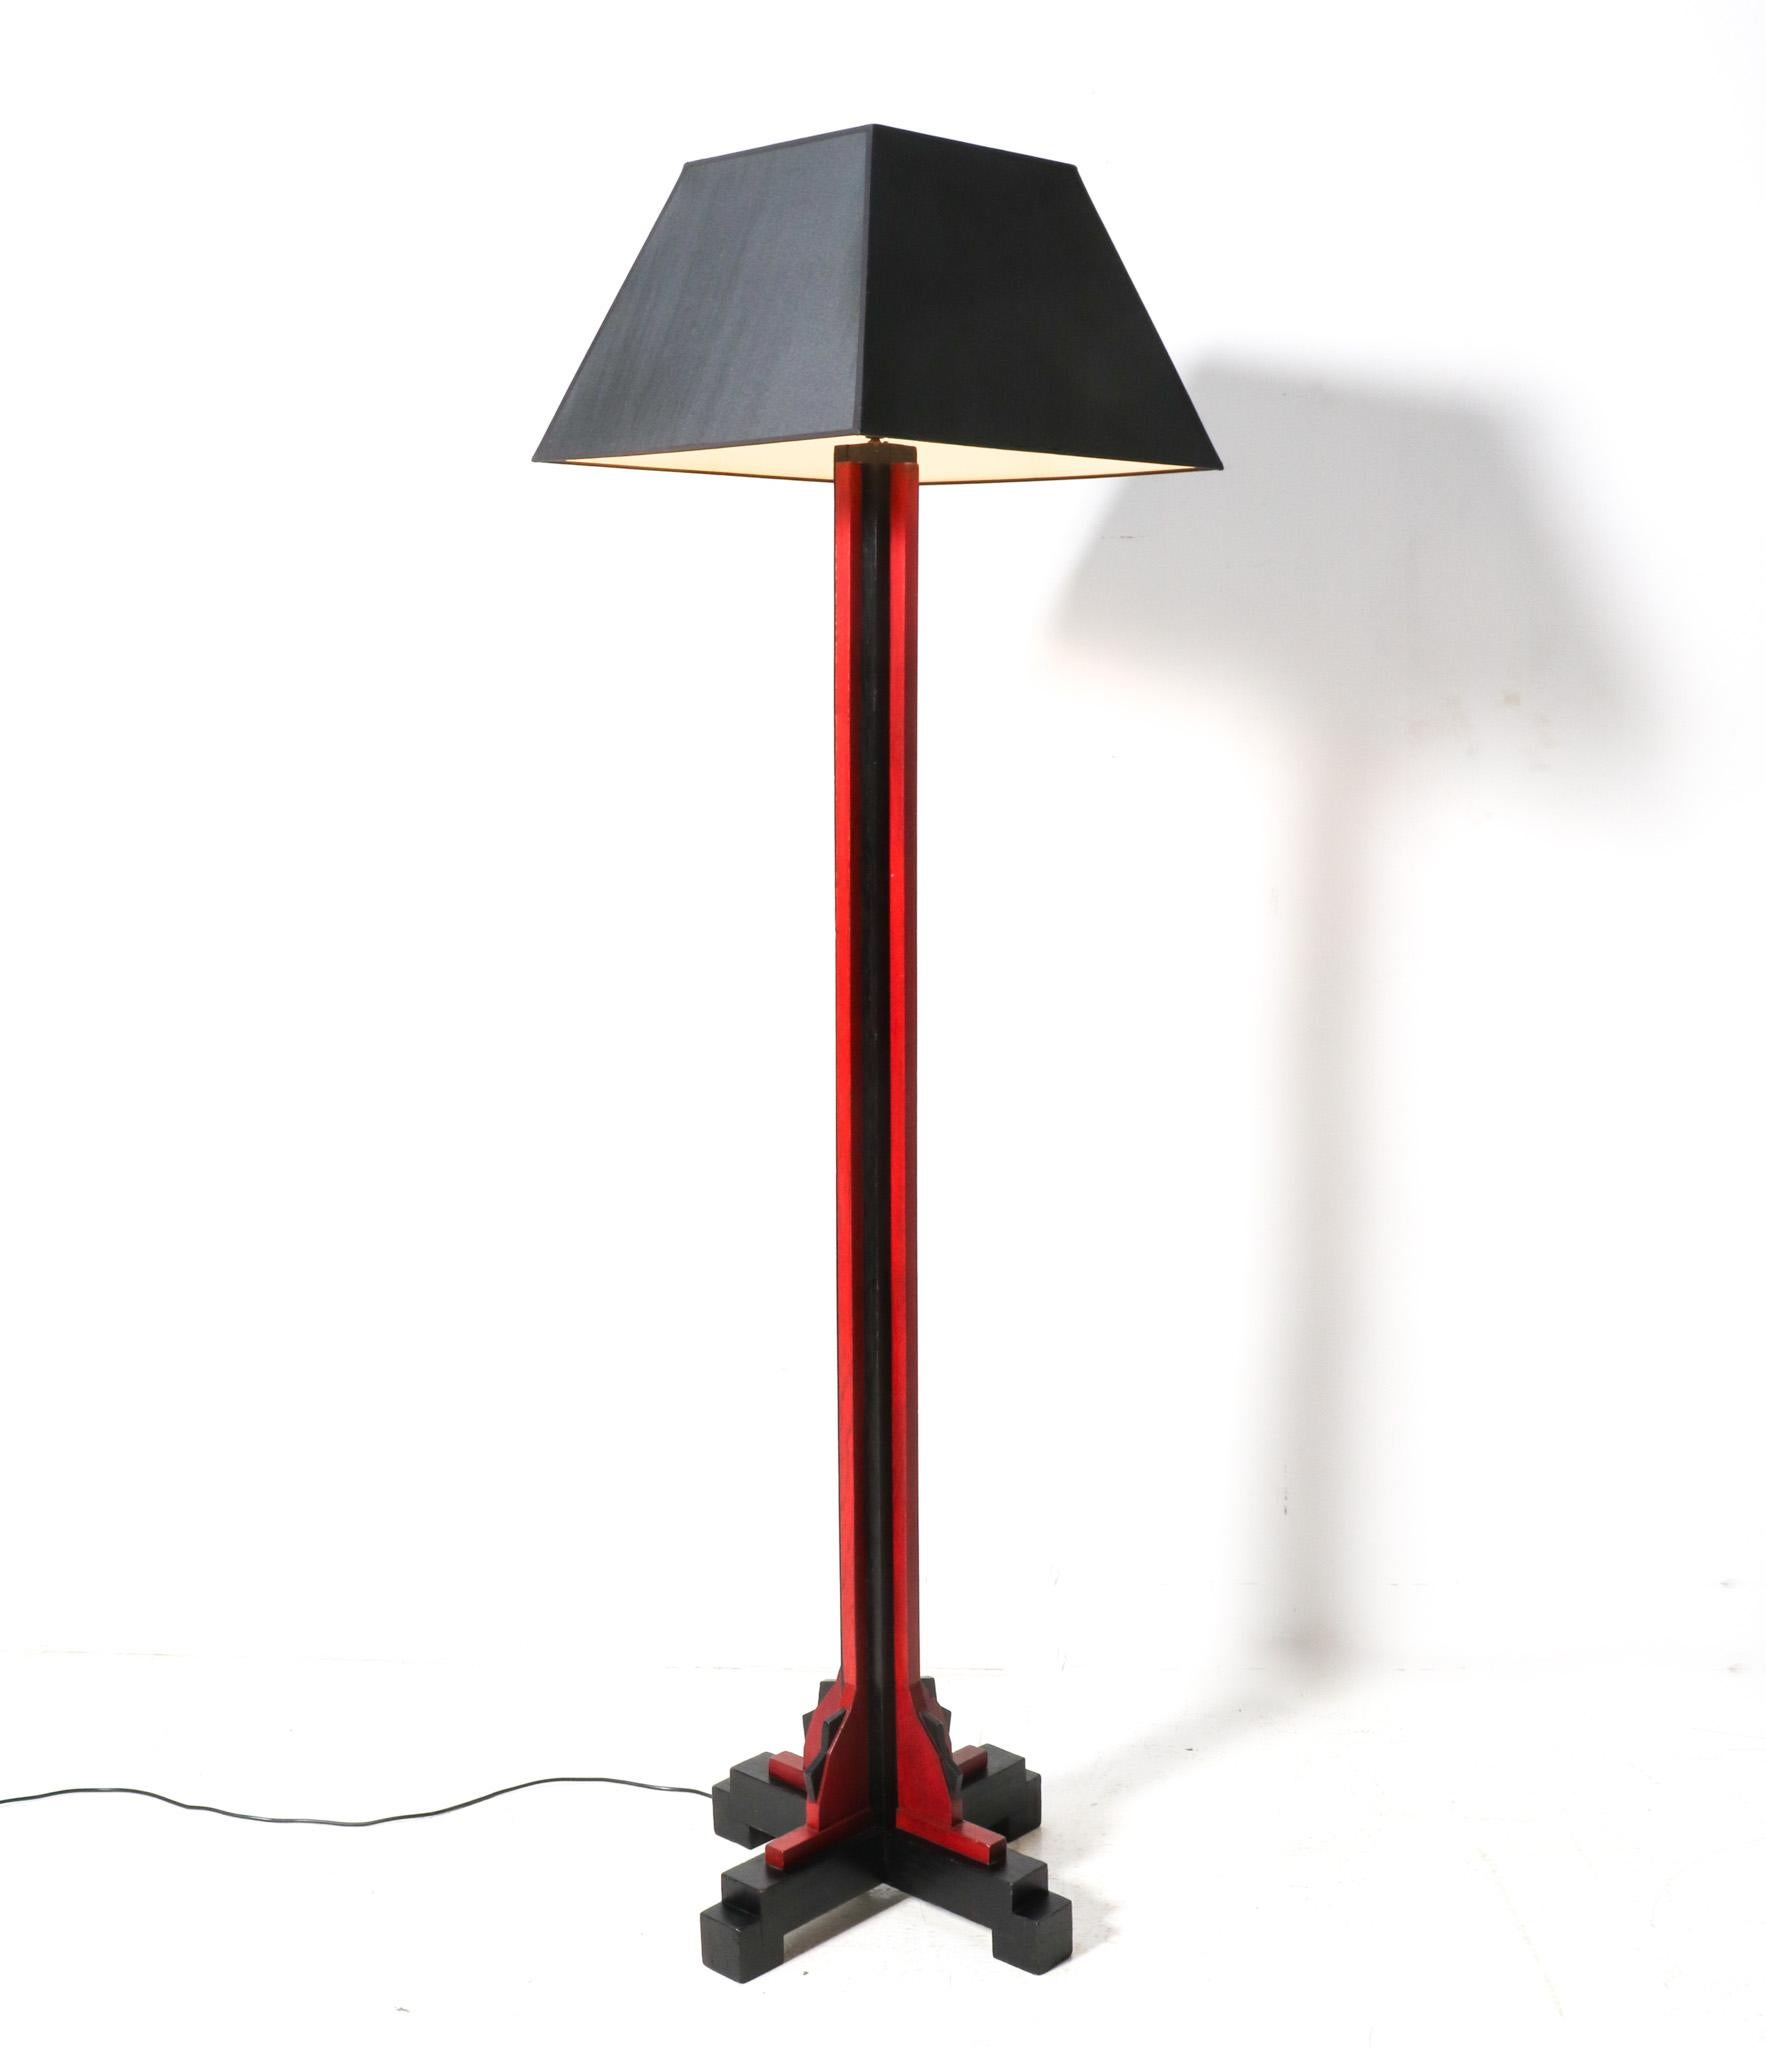 Lacquered Oak Art Deco Modernist Floor Lamp by Cor Alons, 1920s In Good Condition For Sale In Amsterdam, NL